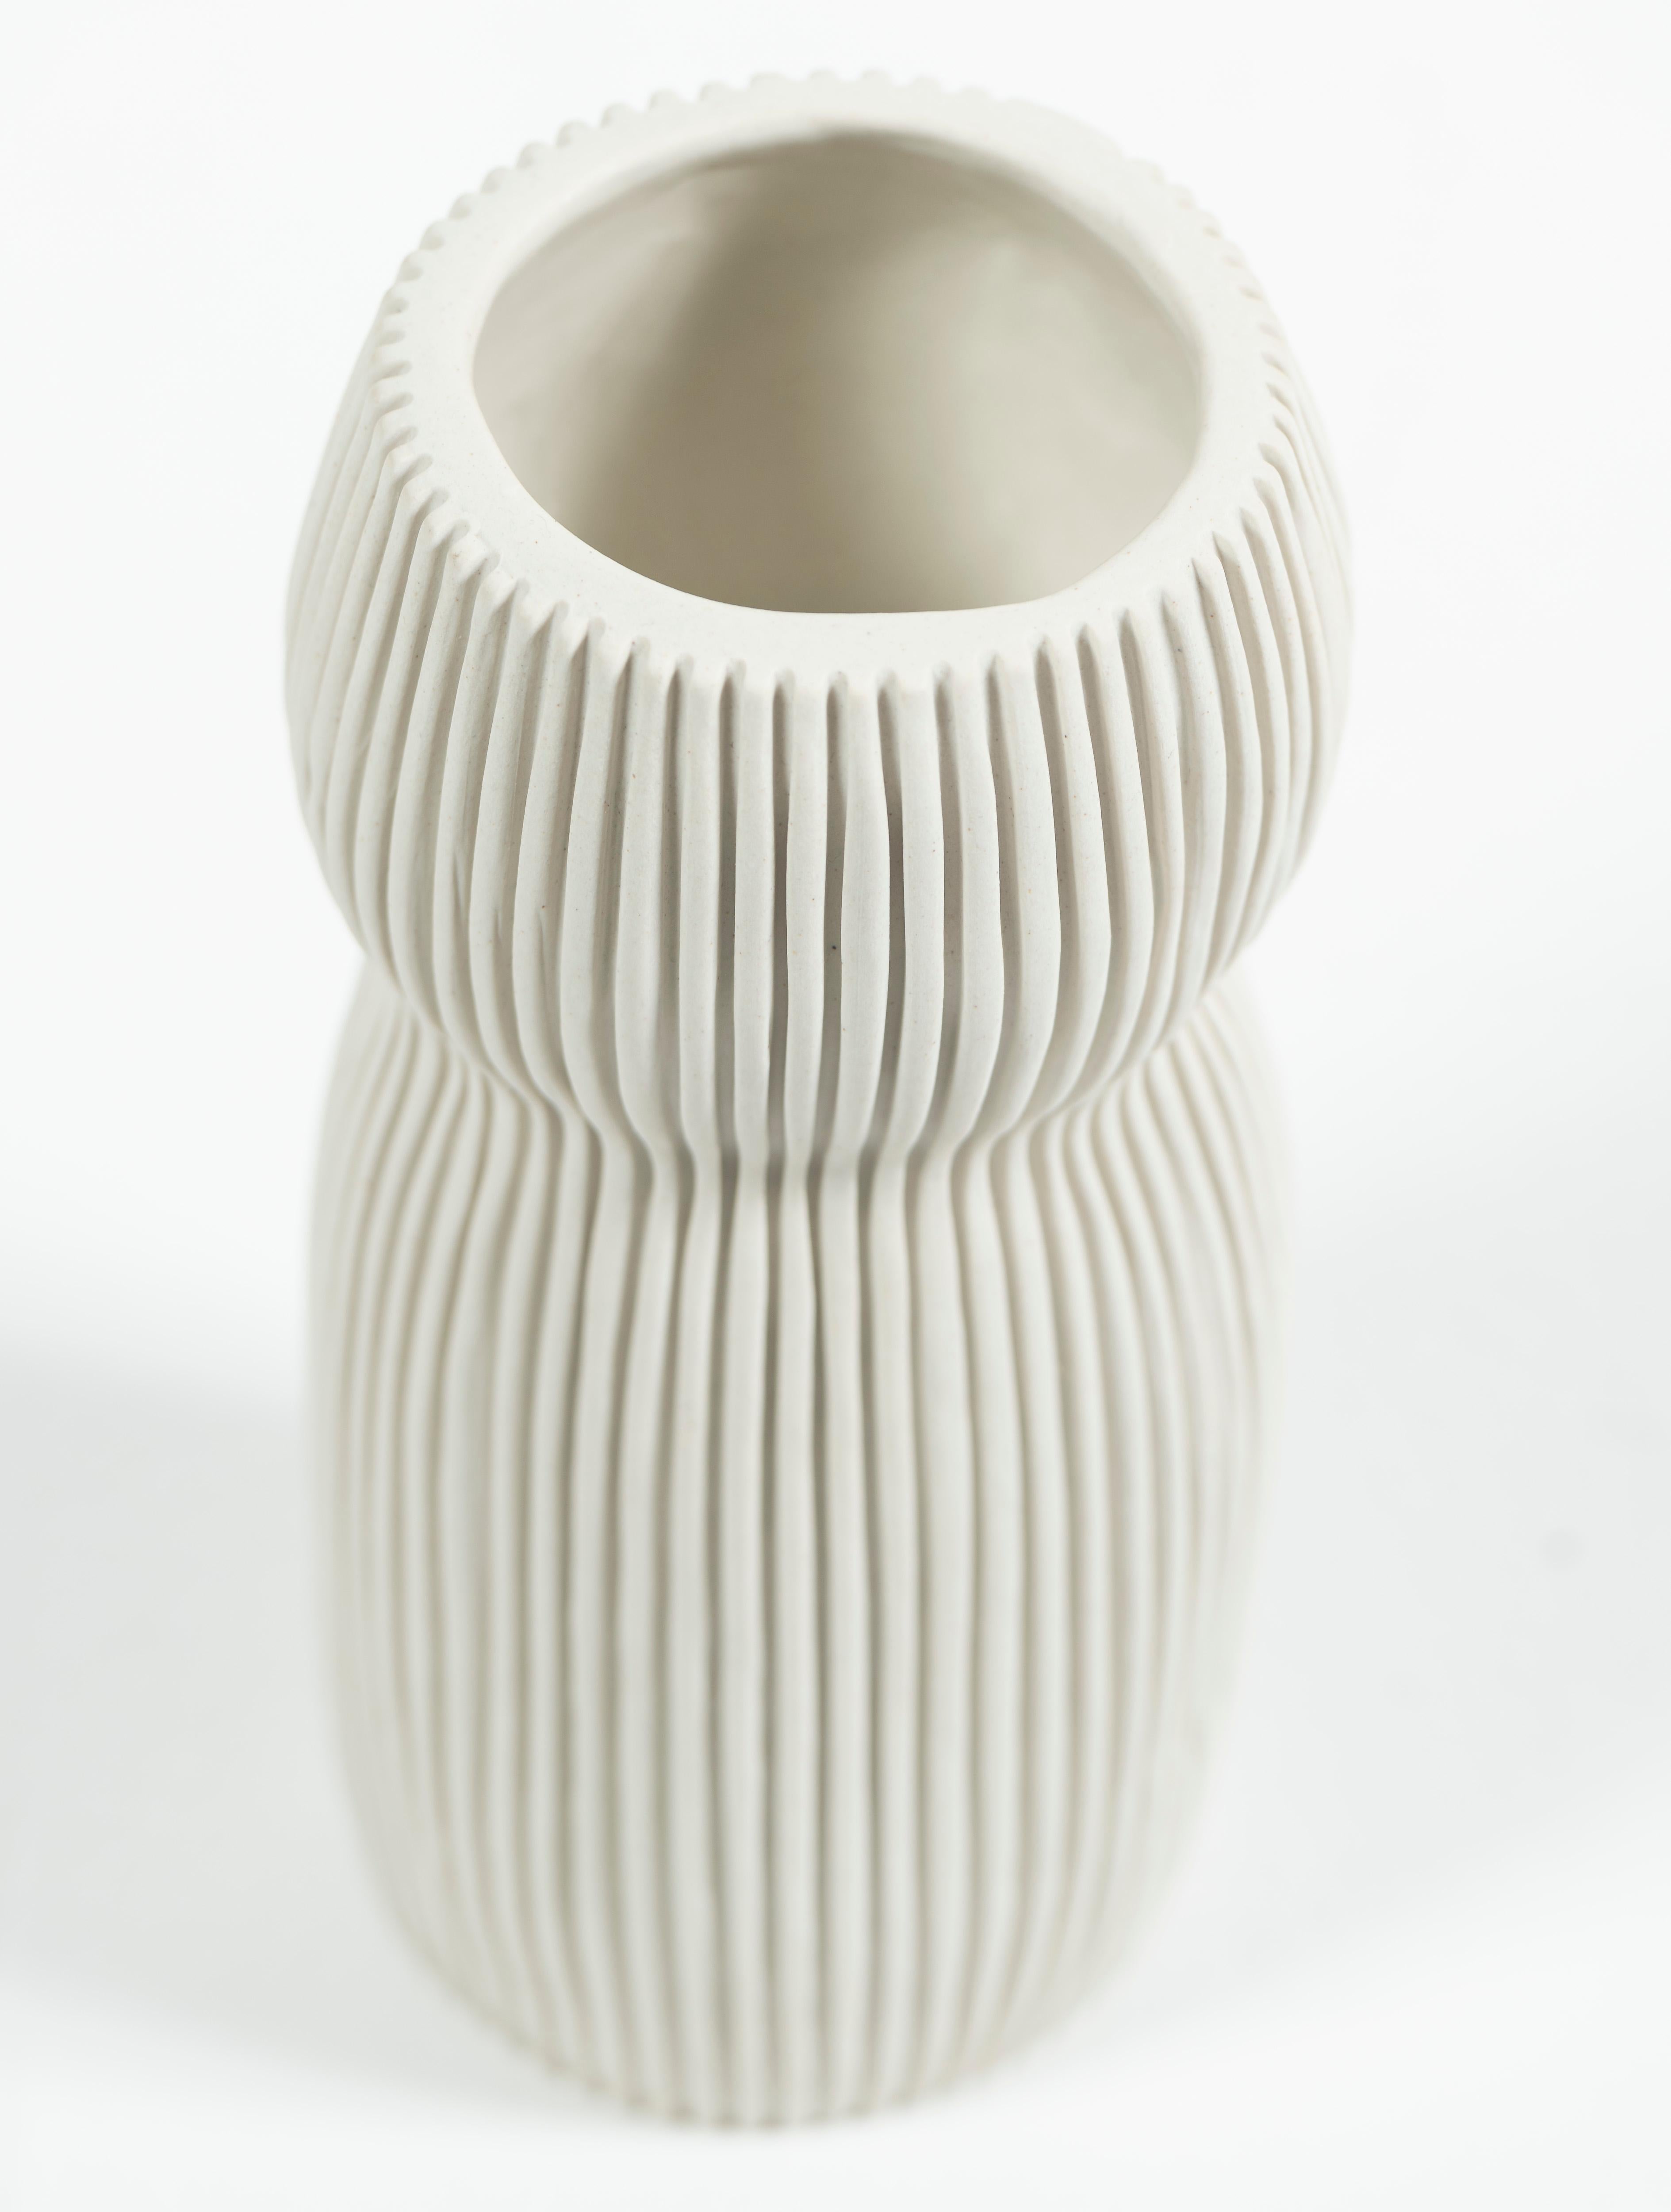 Hand Crafted Contemporary Ceramic Vase in Cream, signed For Sale 2